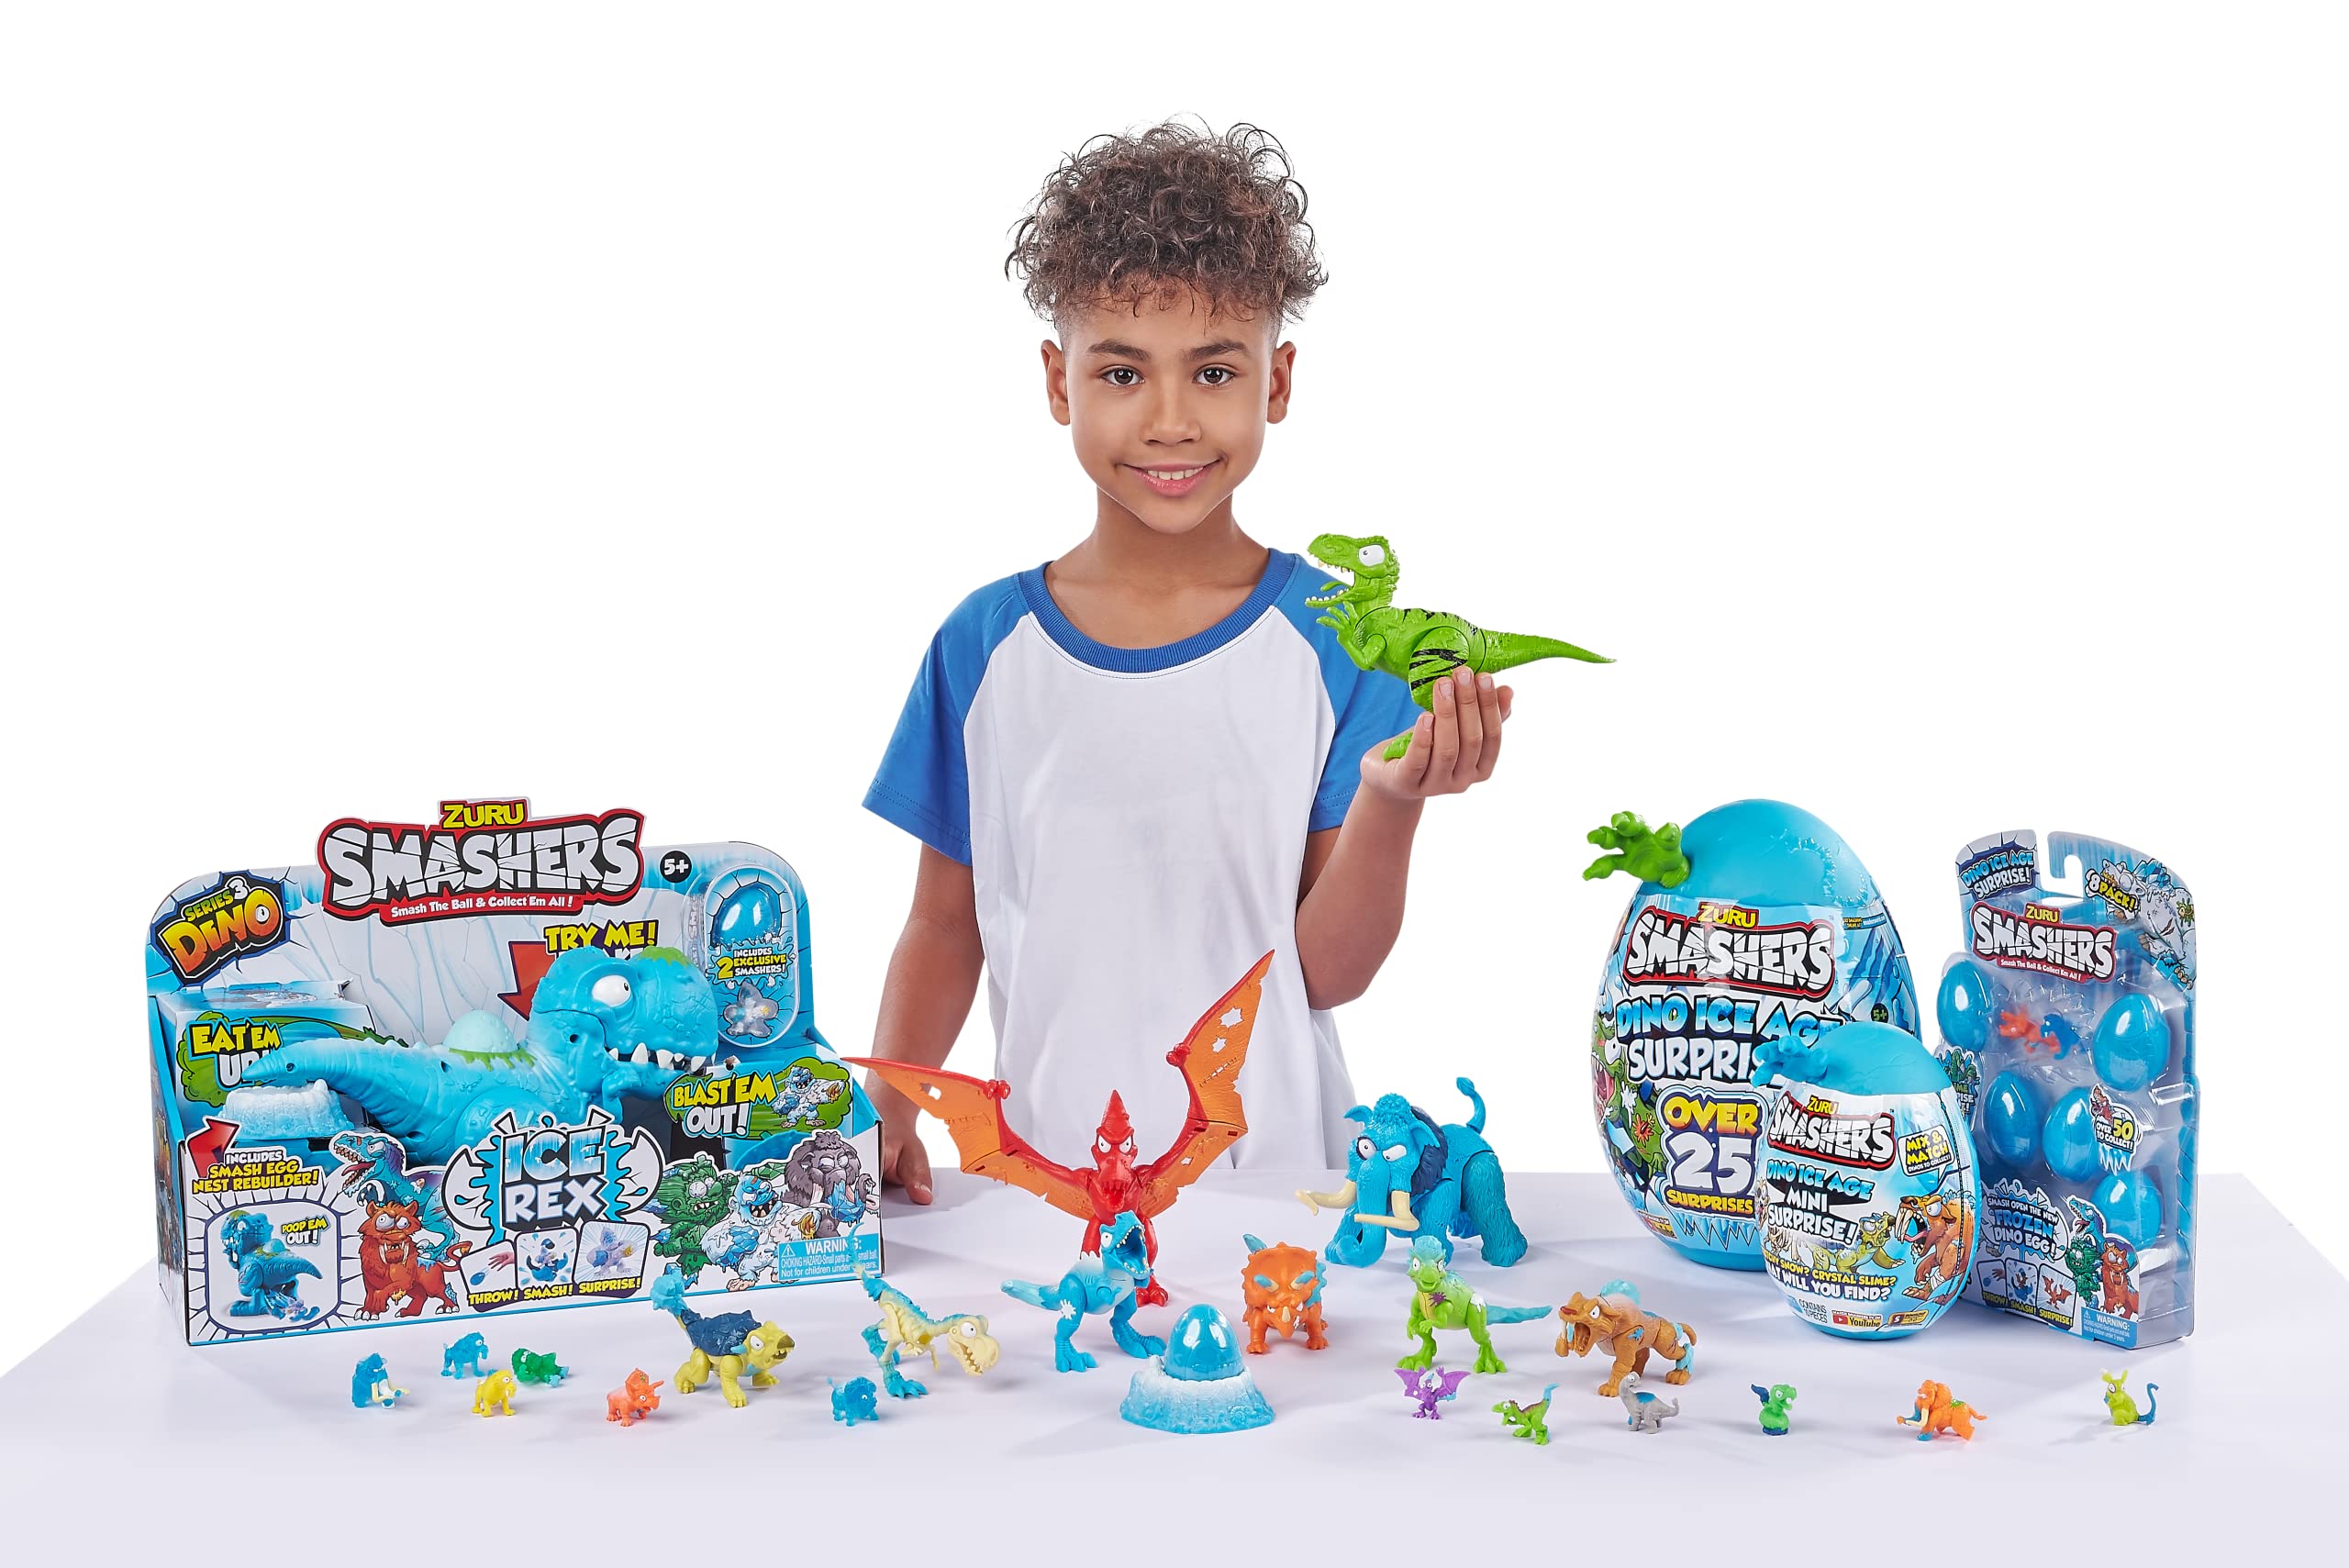 Smashers Dino Ice Age Ice Rex Playset Series 3 T-Rex Toy Set by ZURU with Accessories, Tyrannosaurus Rex Collectible Toy for Boys Kids Gift Set , Cyan